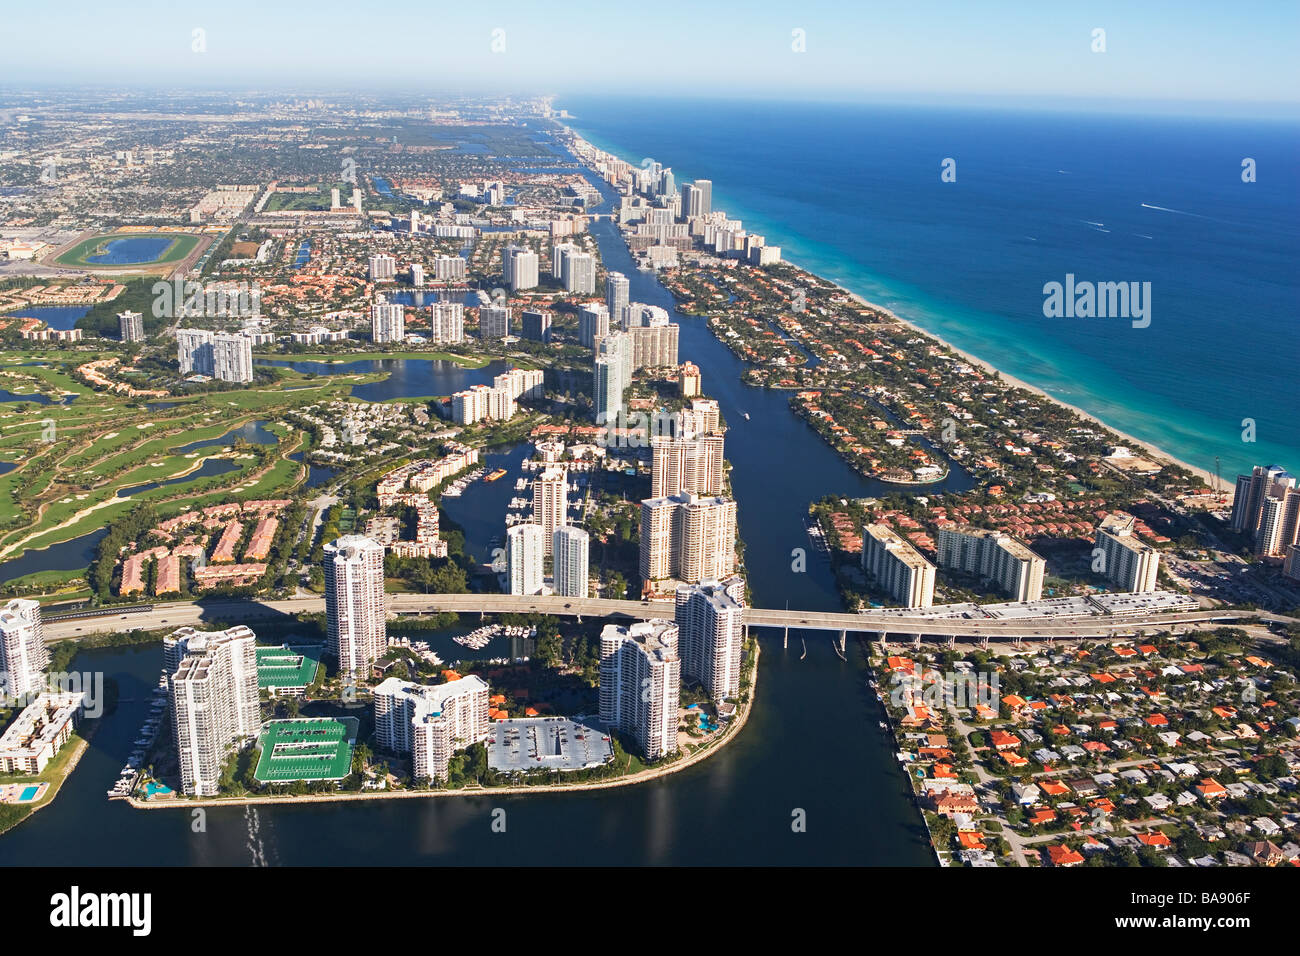 Aerial view of waterfront city Stock Photo